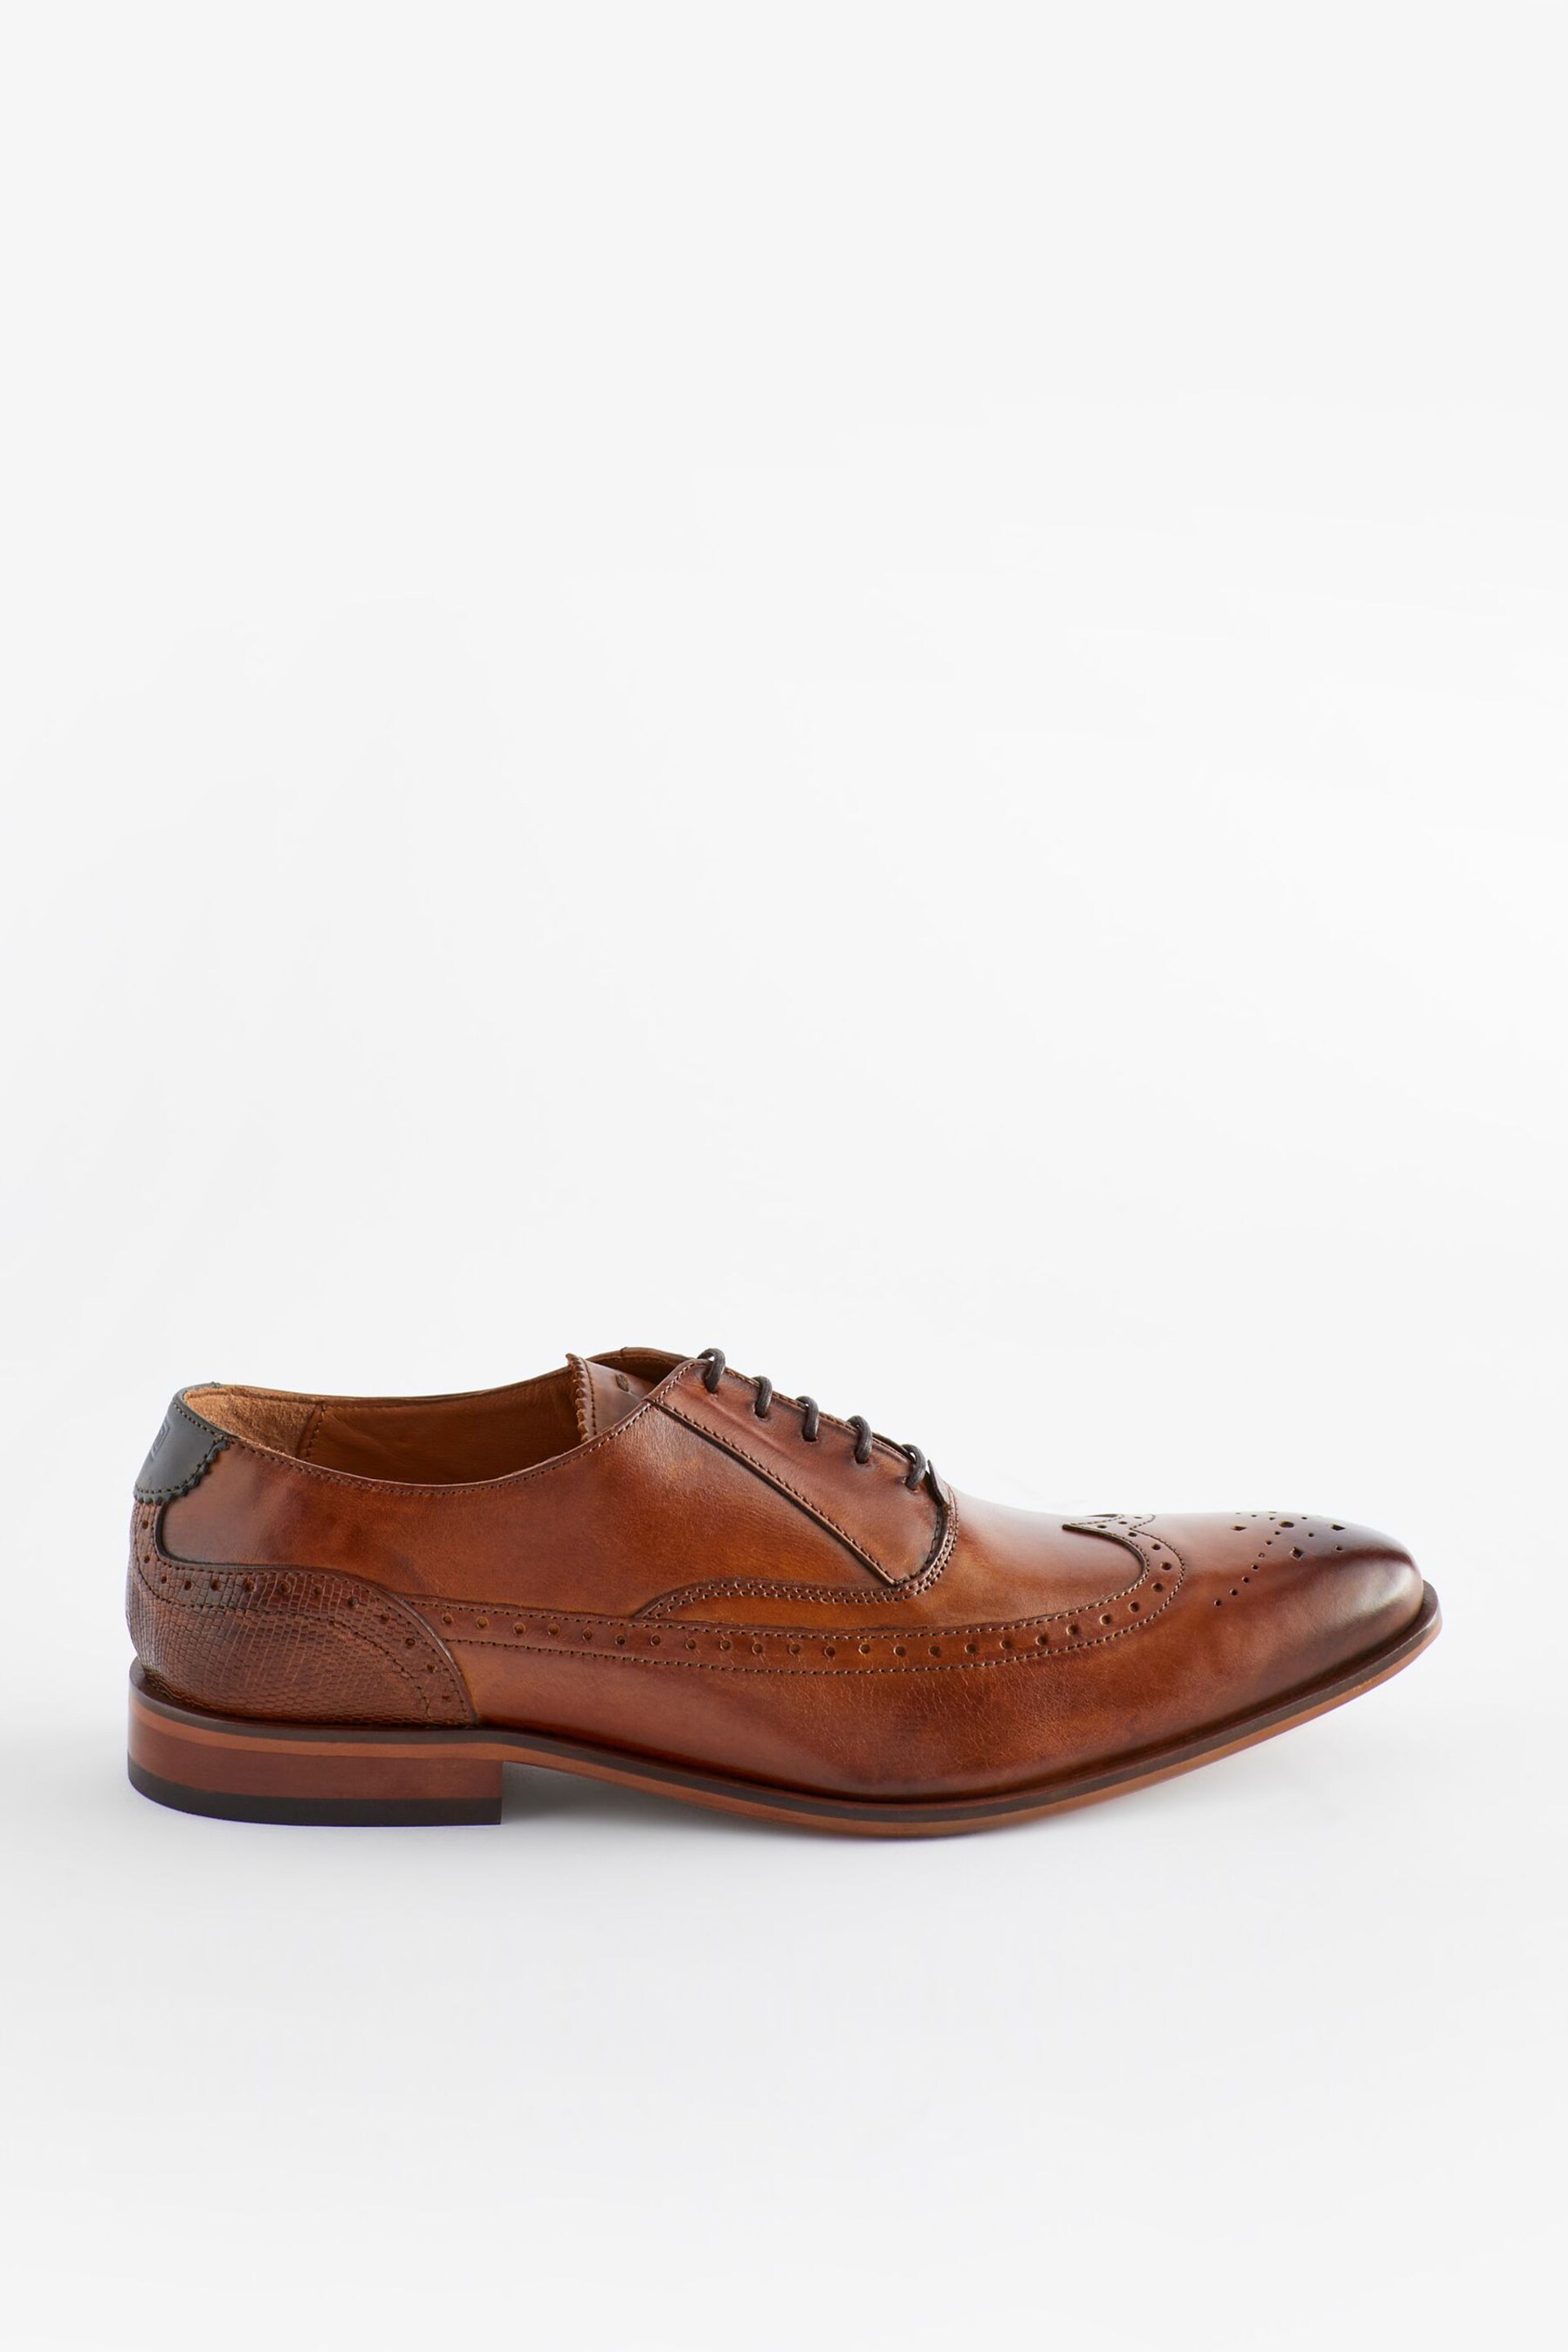 Dark Tan Brown Leather Oxford Wing Cap Brogue Shoes - Image 3 of 8